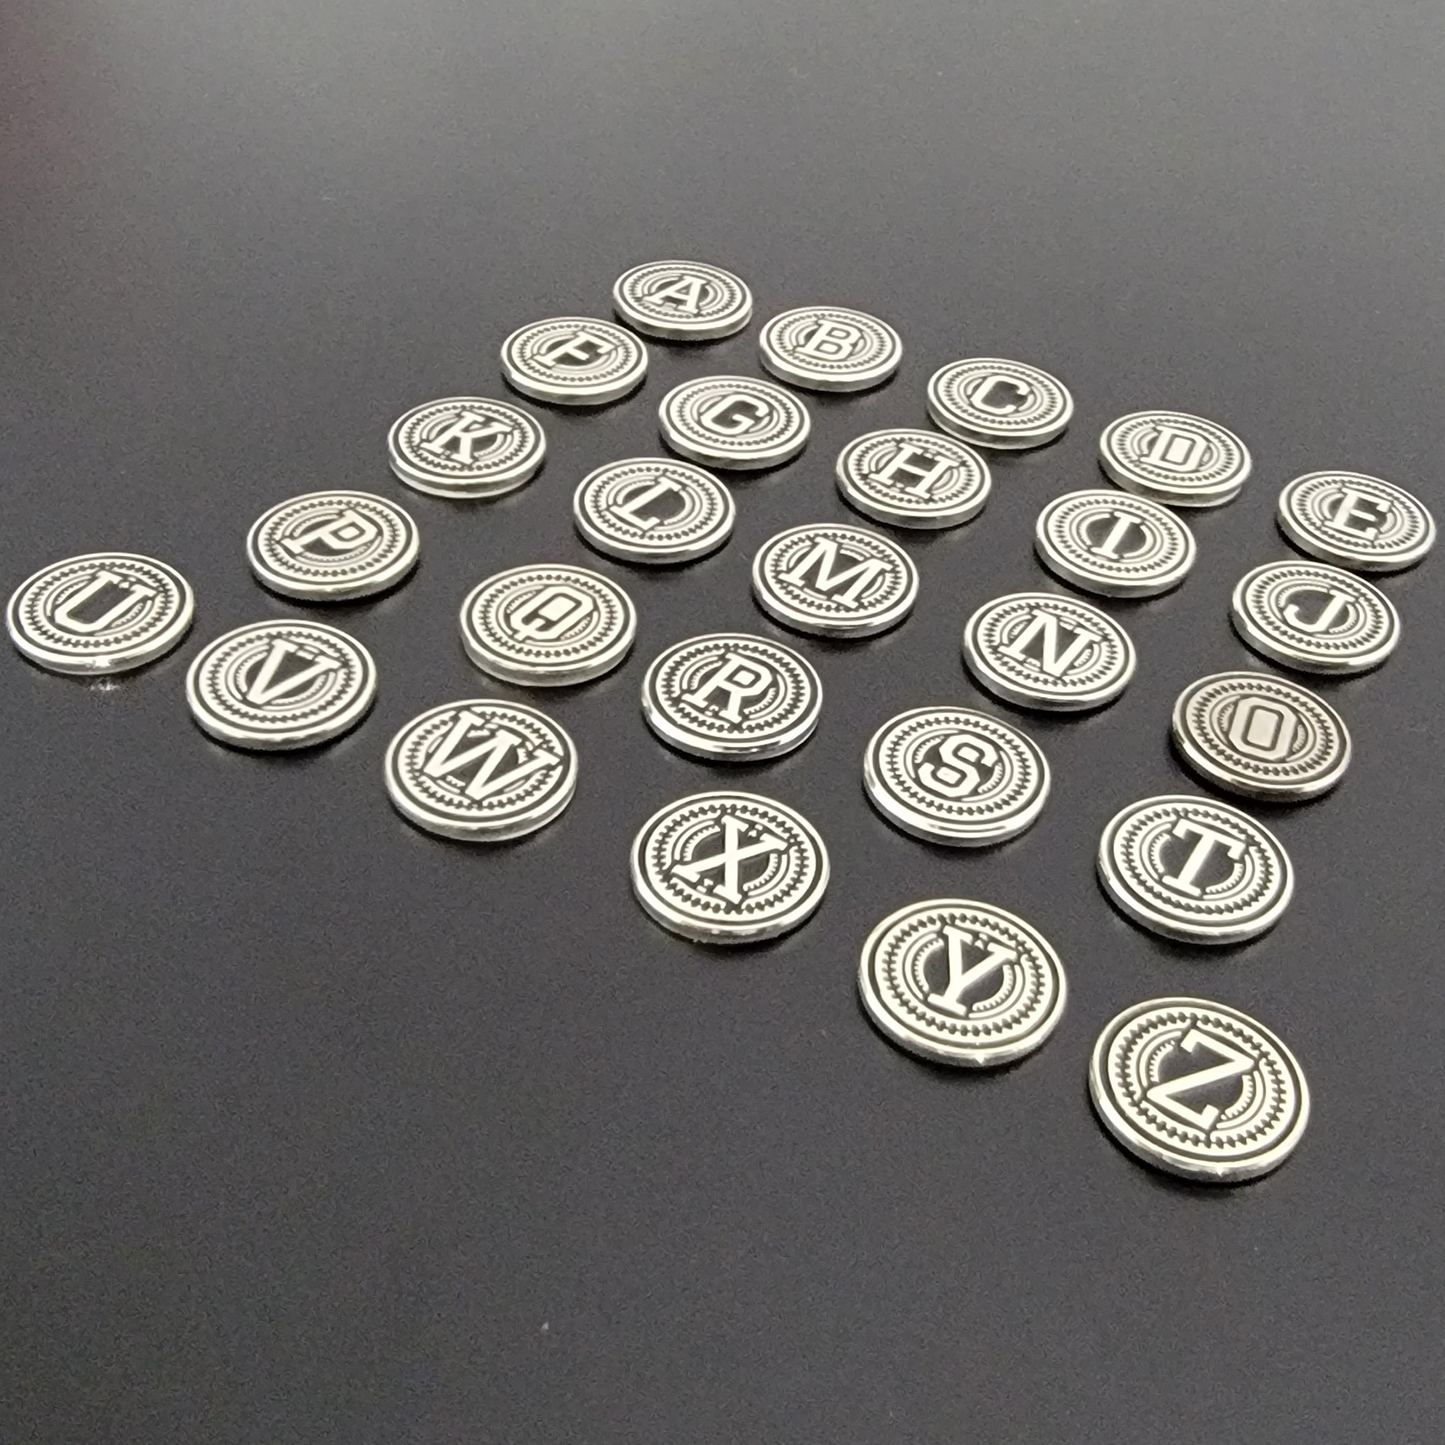 Real Silver Plated Grips Emblems 13 mm Medallions